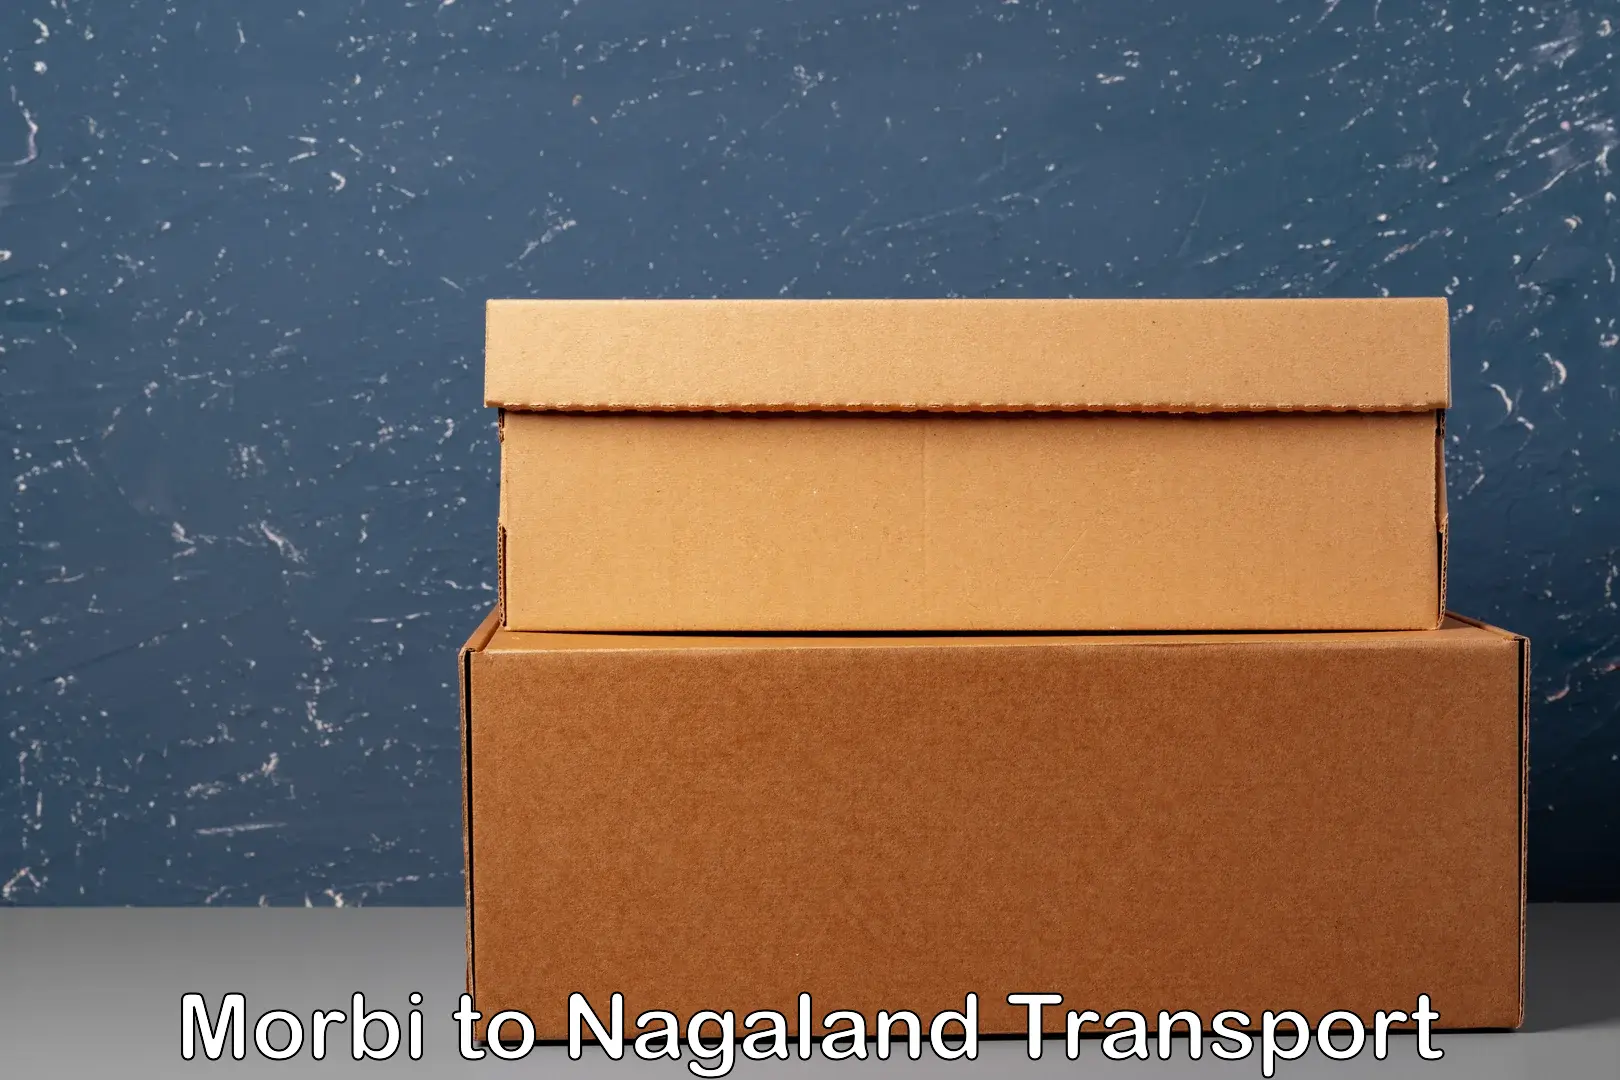 Container transport service Morbi to Nagaland